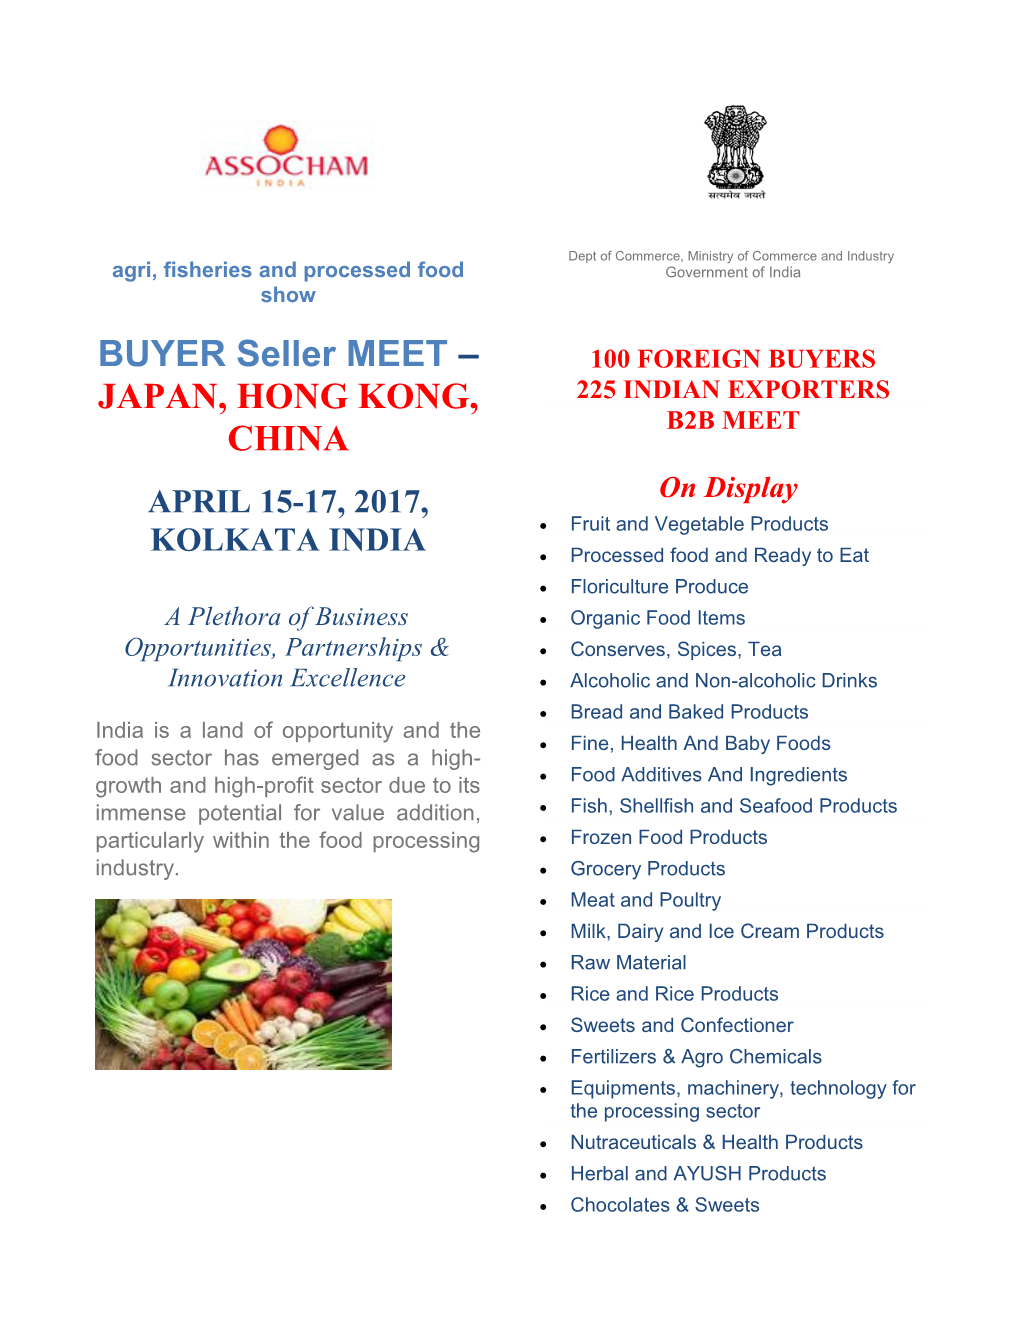 Agri, Fisheries and Processed Food Show